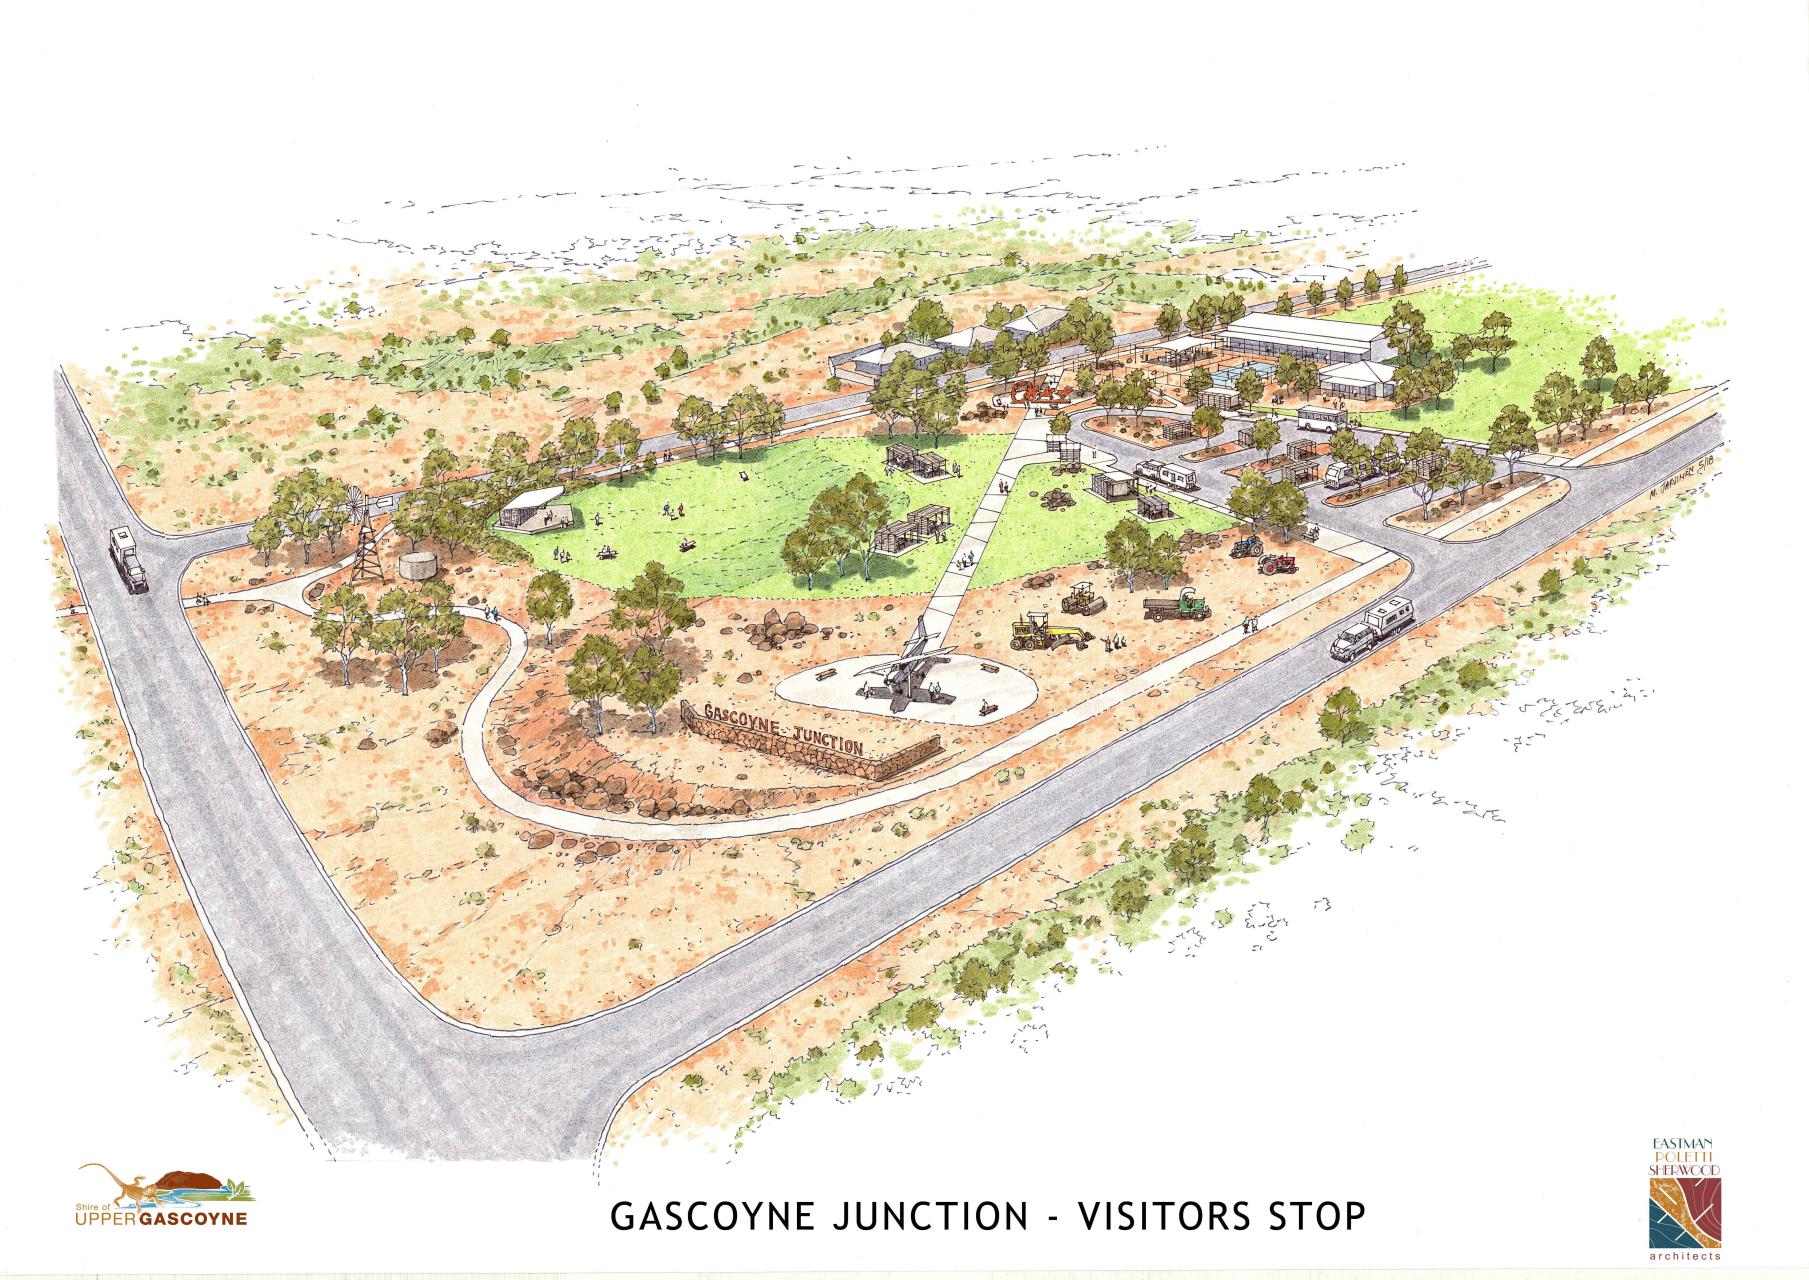 Name the Gascoyne Junction Visitor Stop